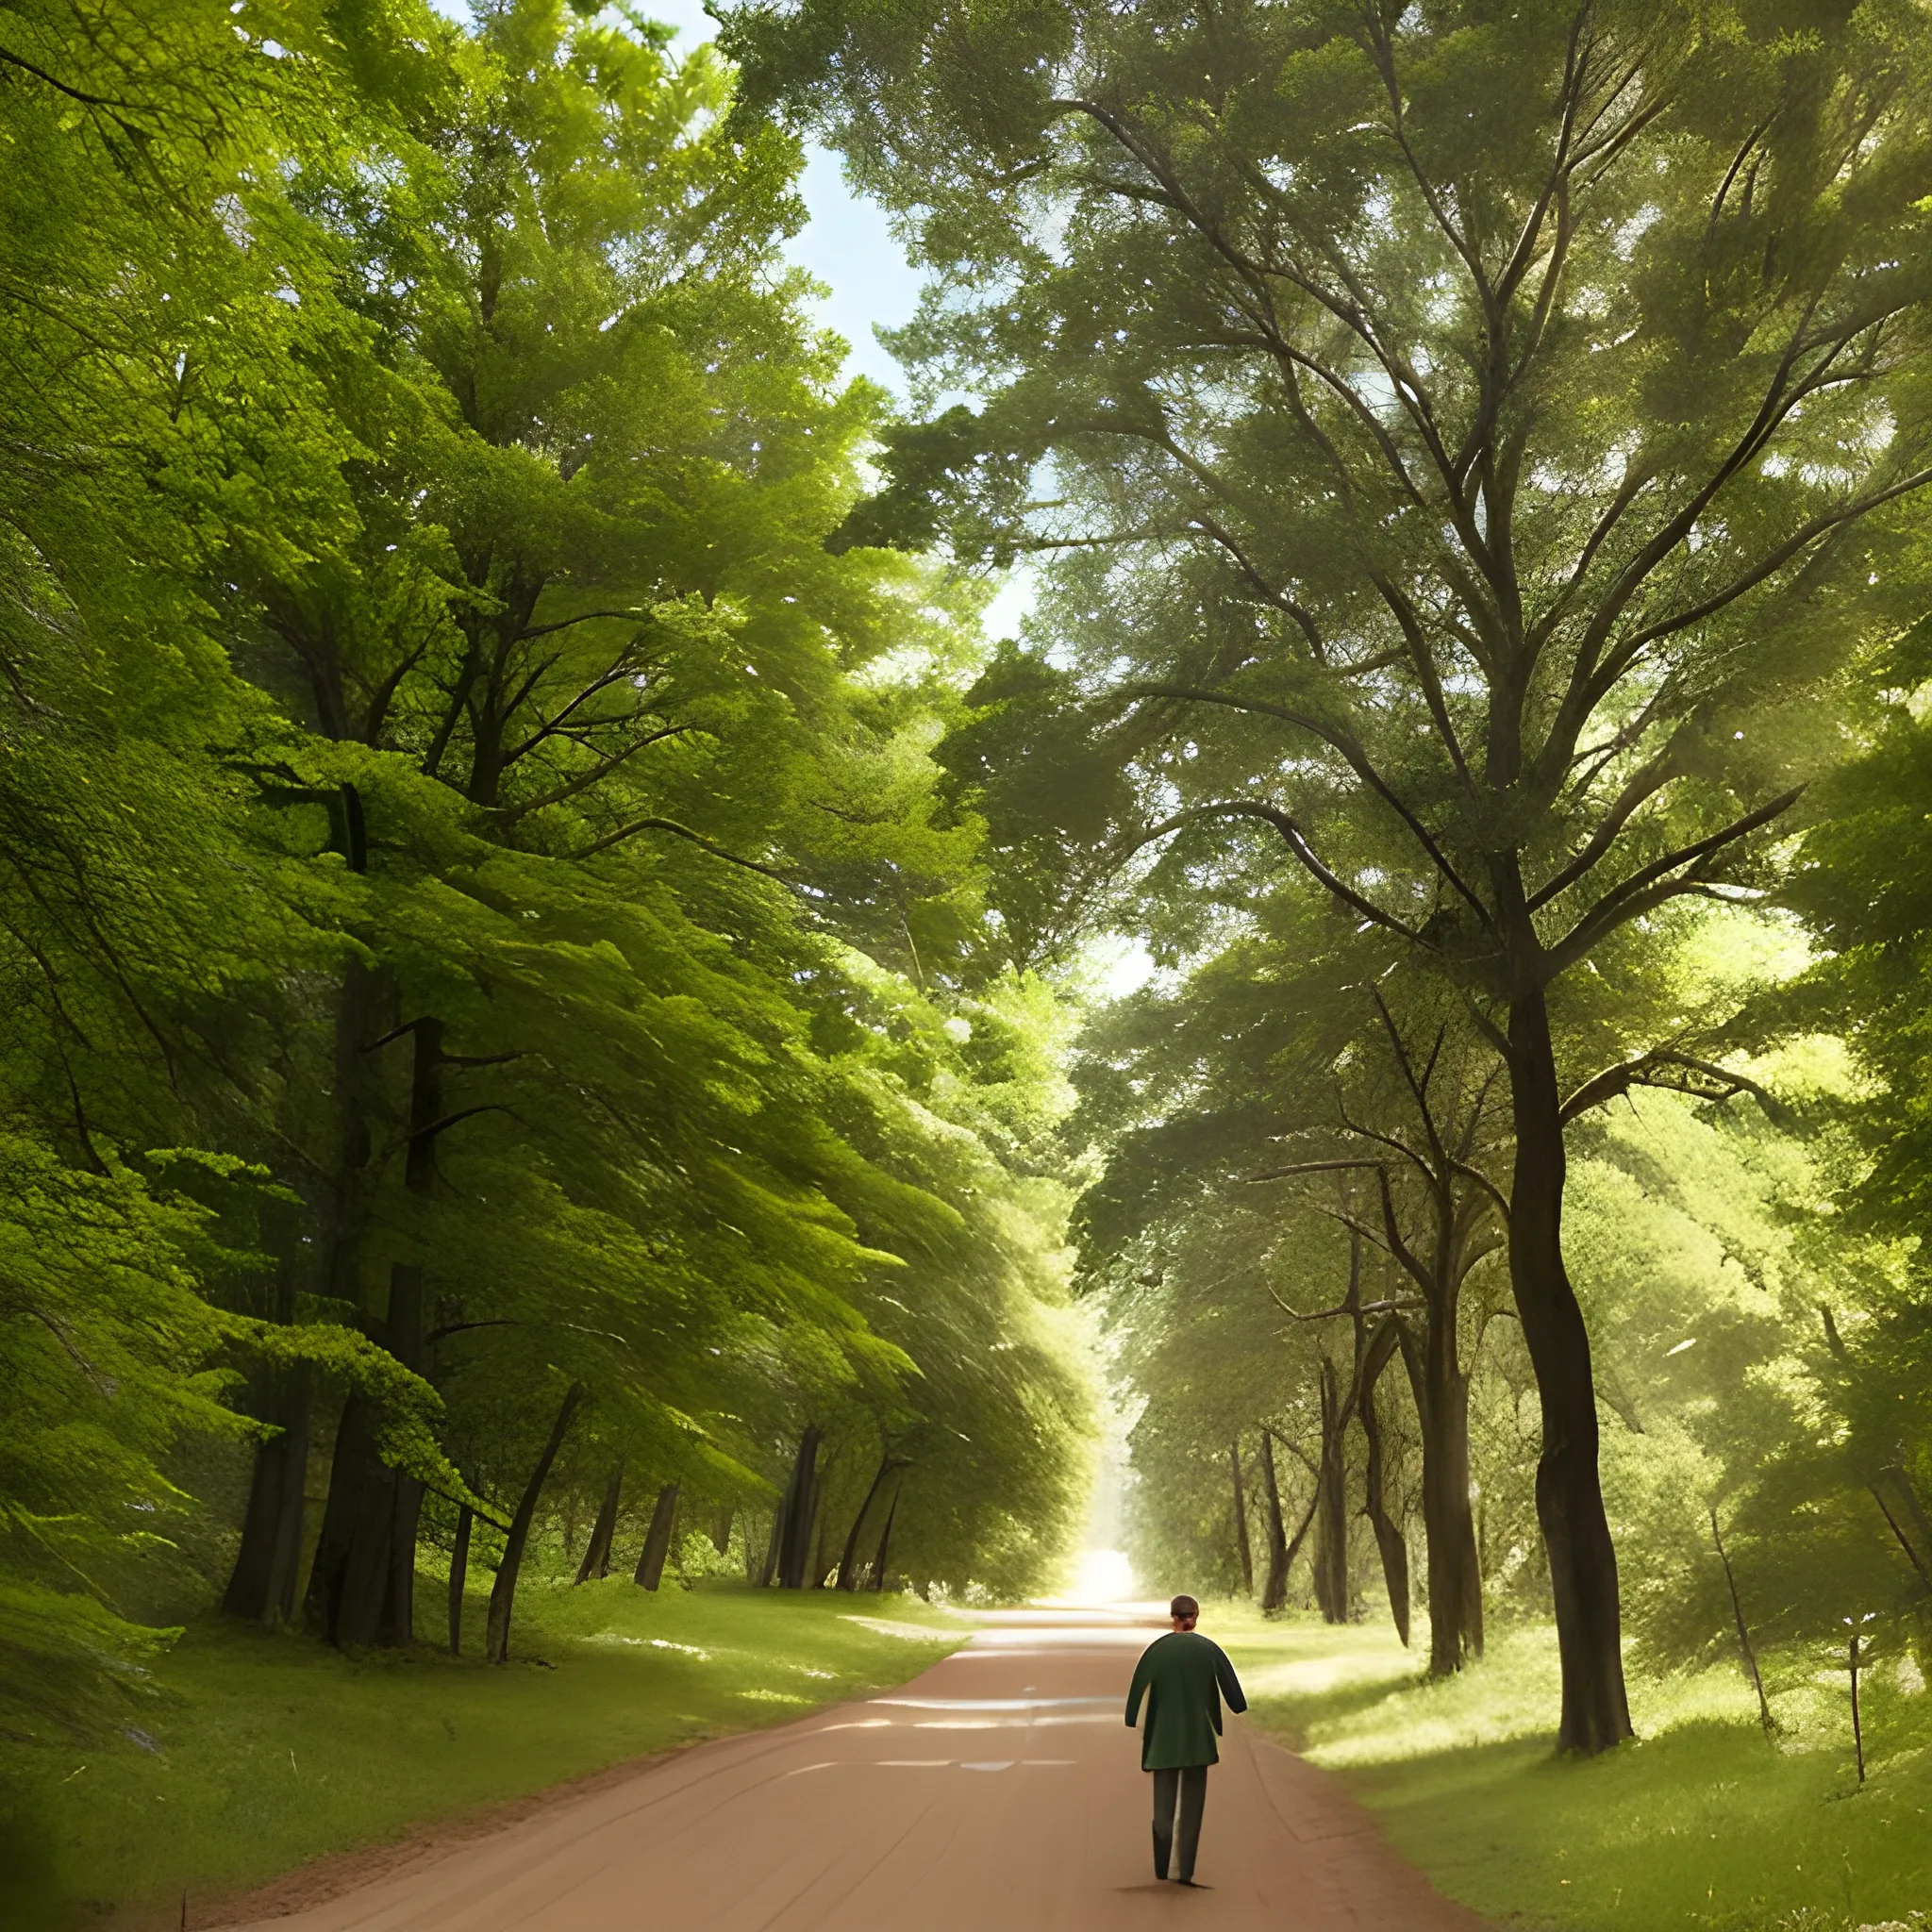 Landscape of a forest with large cedar trees. The leaves are lush green. There is a dirt road going down the middle with trees on either side. There are two figures walking down the road, backs facing the camera. One figure is a man with red hair and simple medieval garb and a pack on his back, the other is a woman with long brown hair and a plain white dress. High quality. Realistic. Medieval times. 